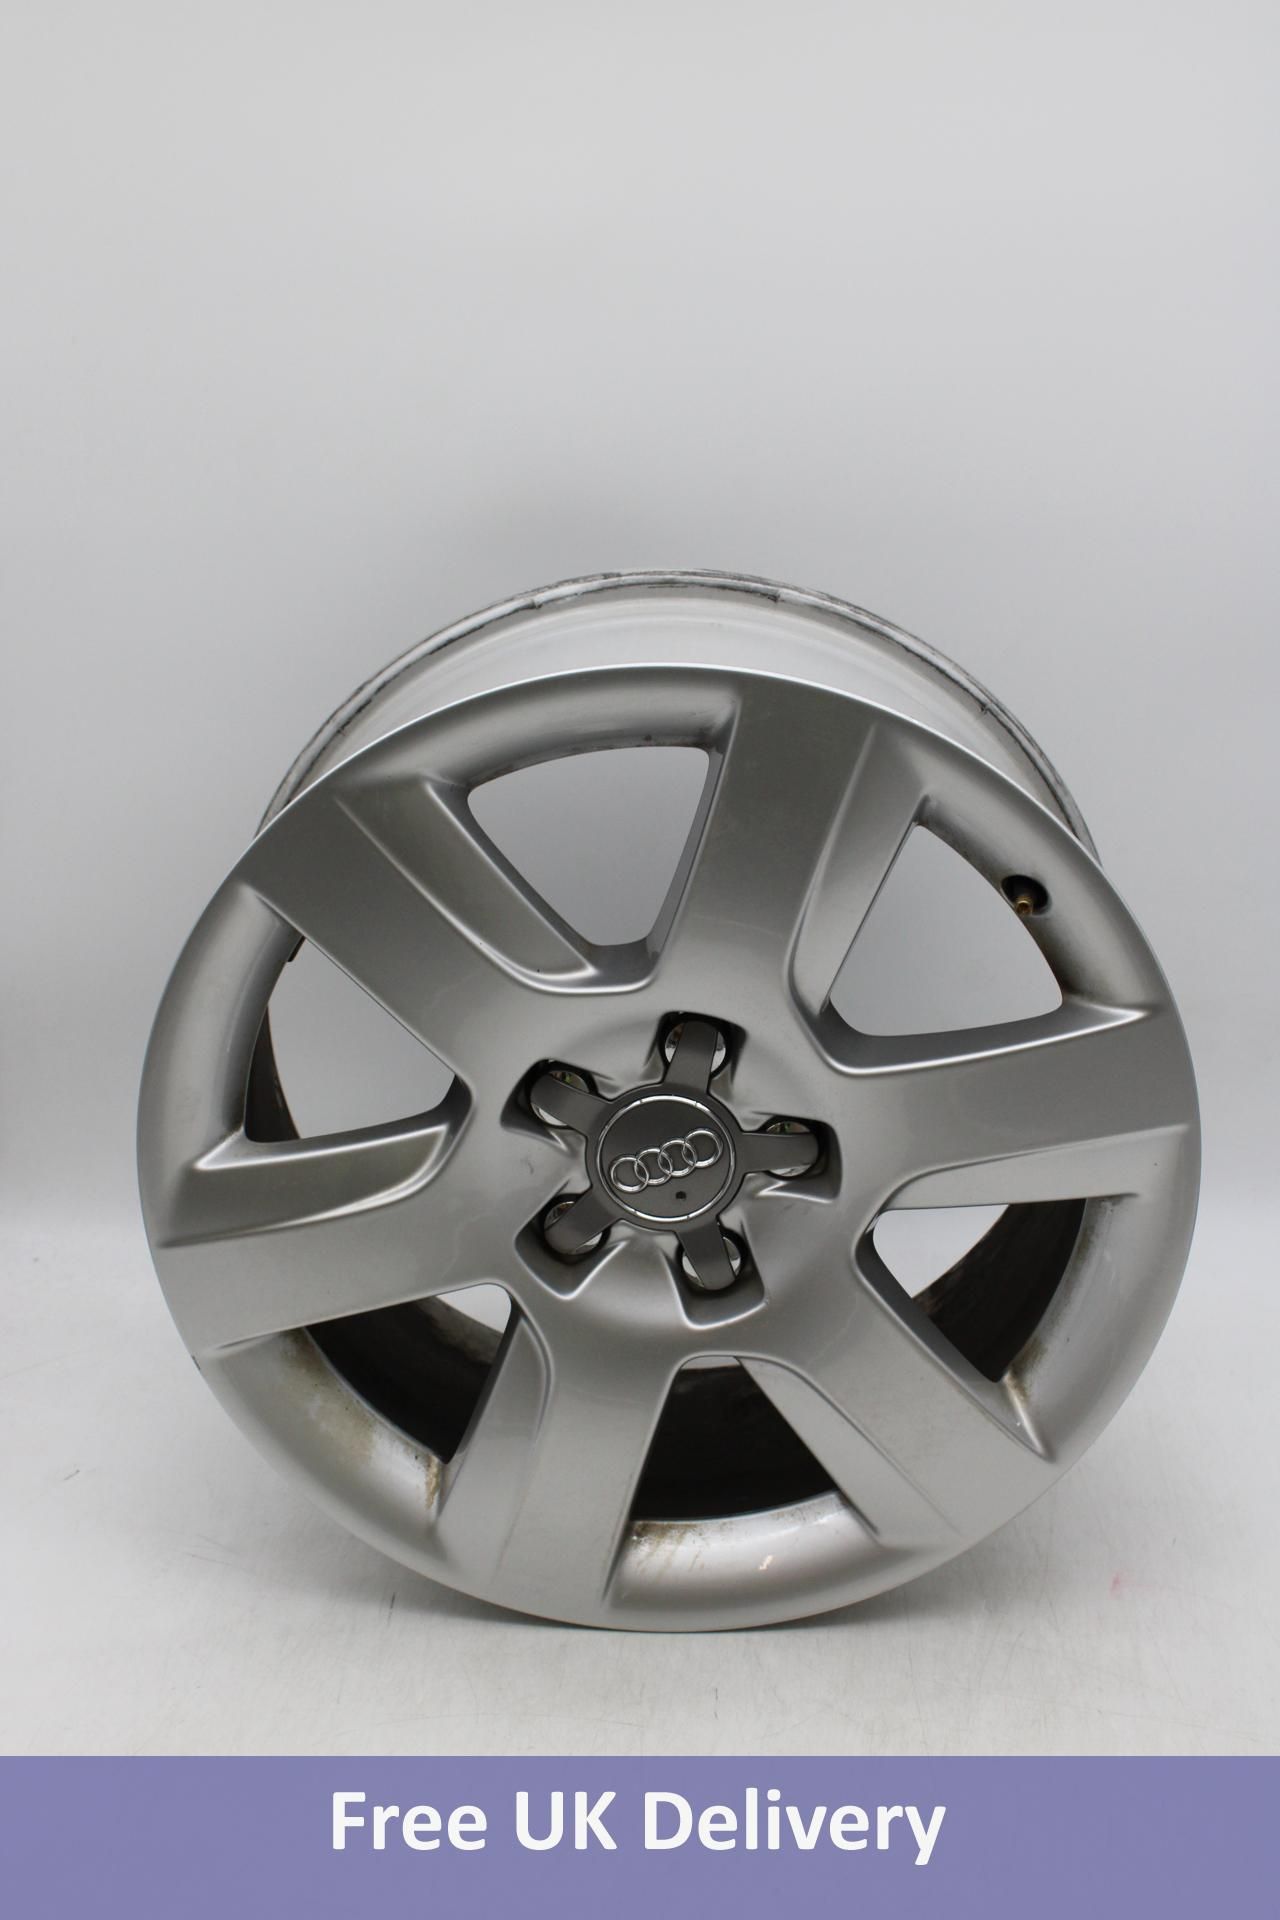 Two Audi 4H0 601 025 A Wheels, Silver, 7.5JX17H2 ET26. Used